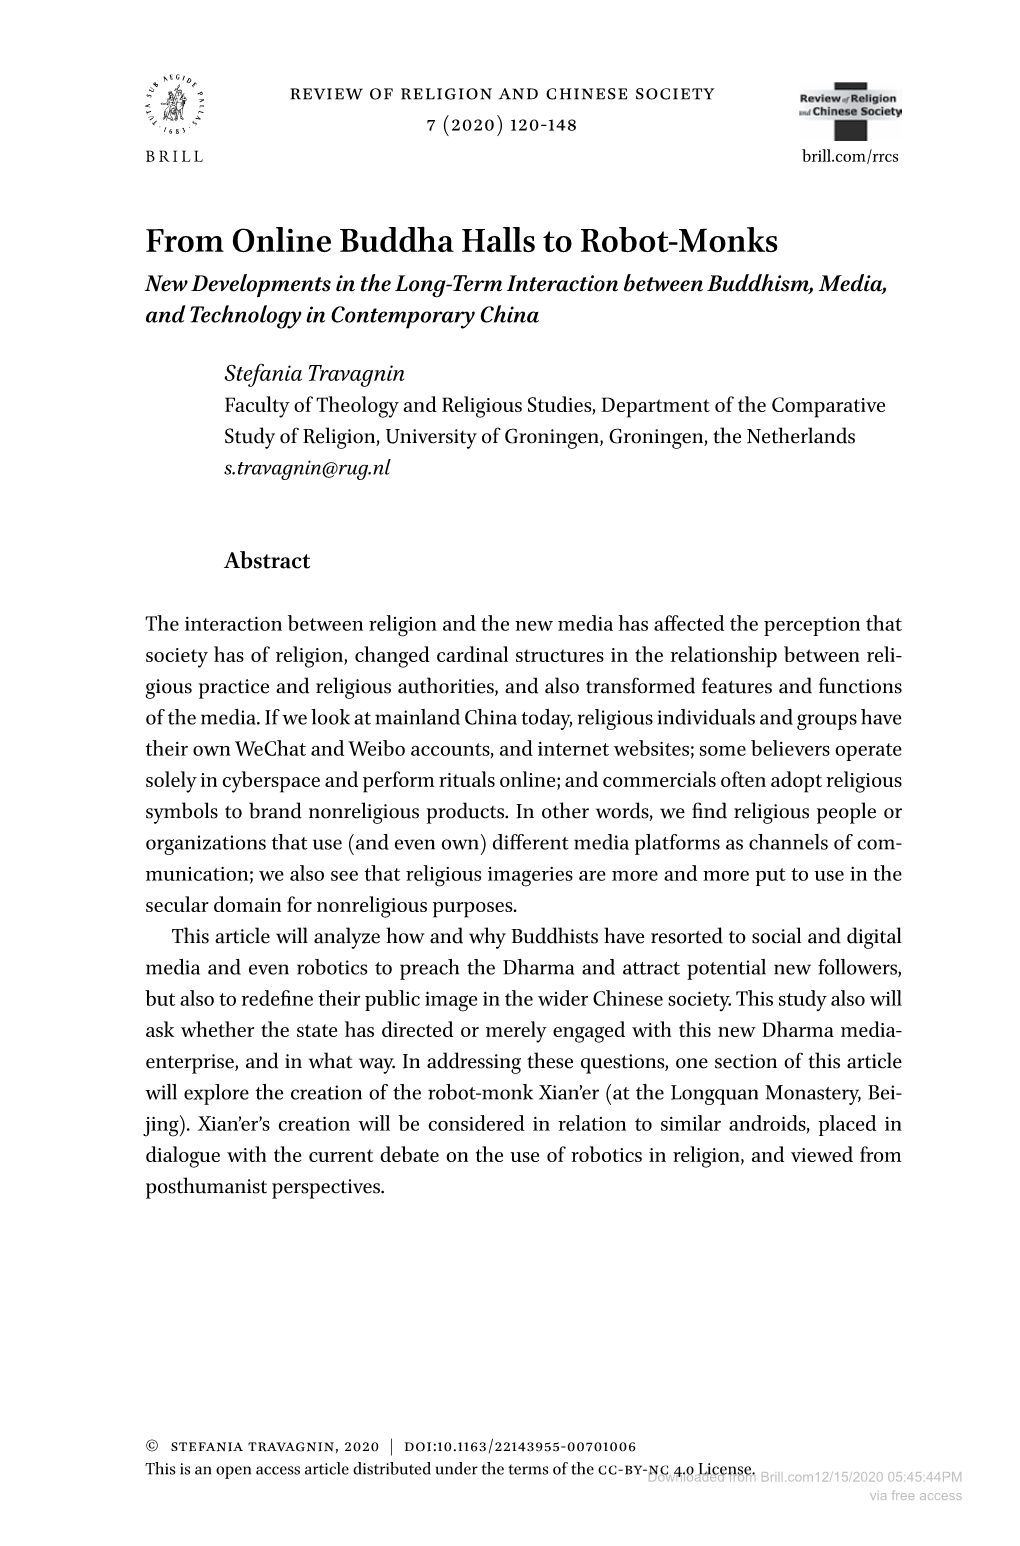 From Online Buddha Halls to Robot-Monks New Developments in the Long-Term Interaction Between Buddhism, Media, and Technology in Contemporary China